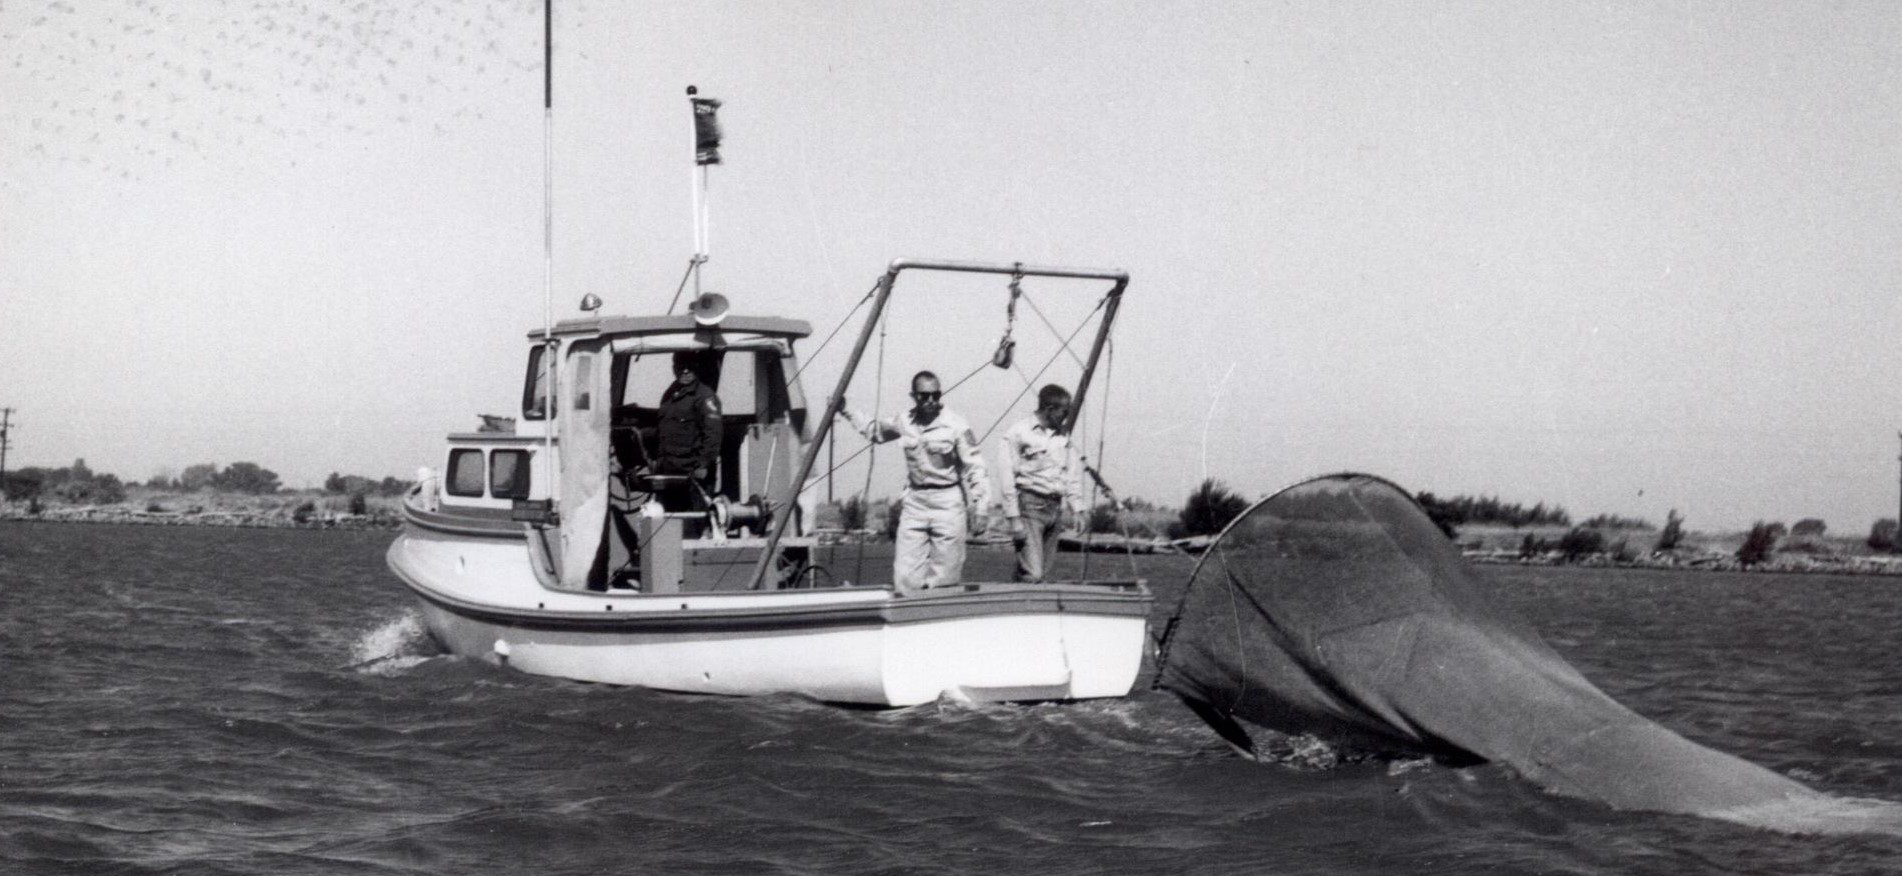 monochrome photo of two men on a boat with net trailing behind